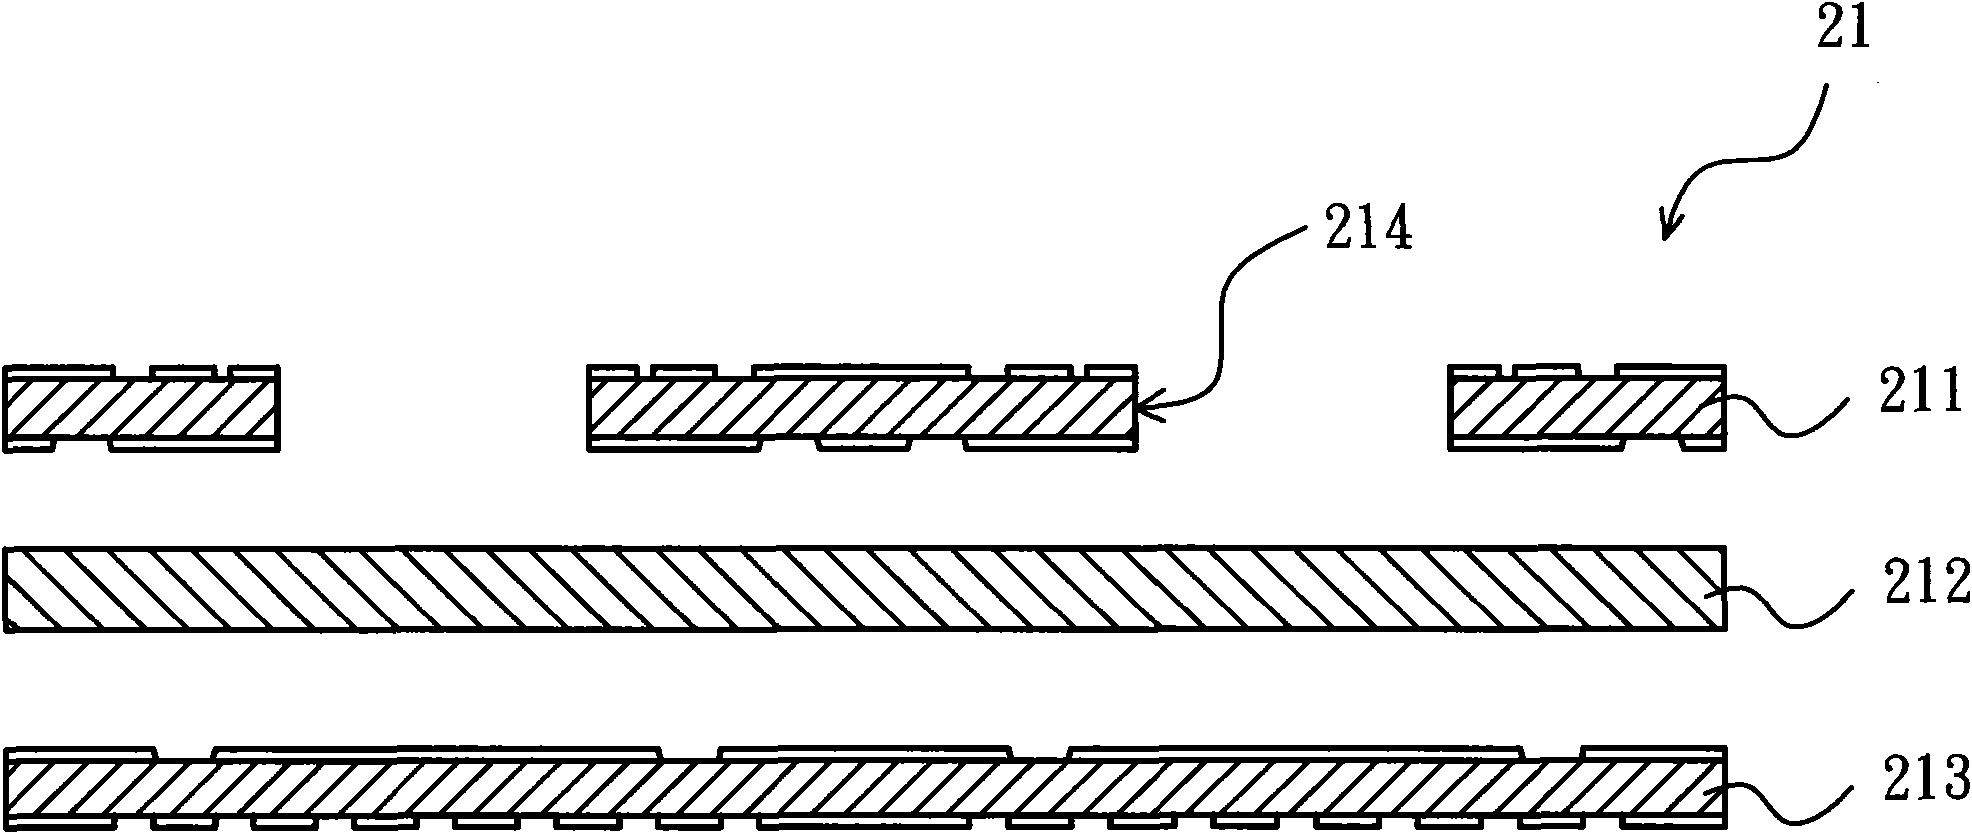 Stacking structure of semiconductor packages